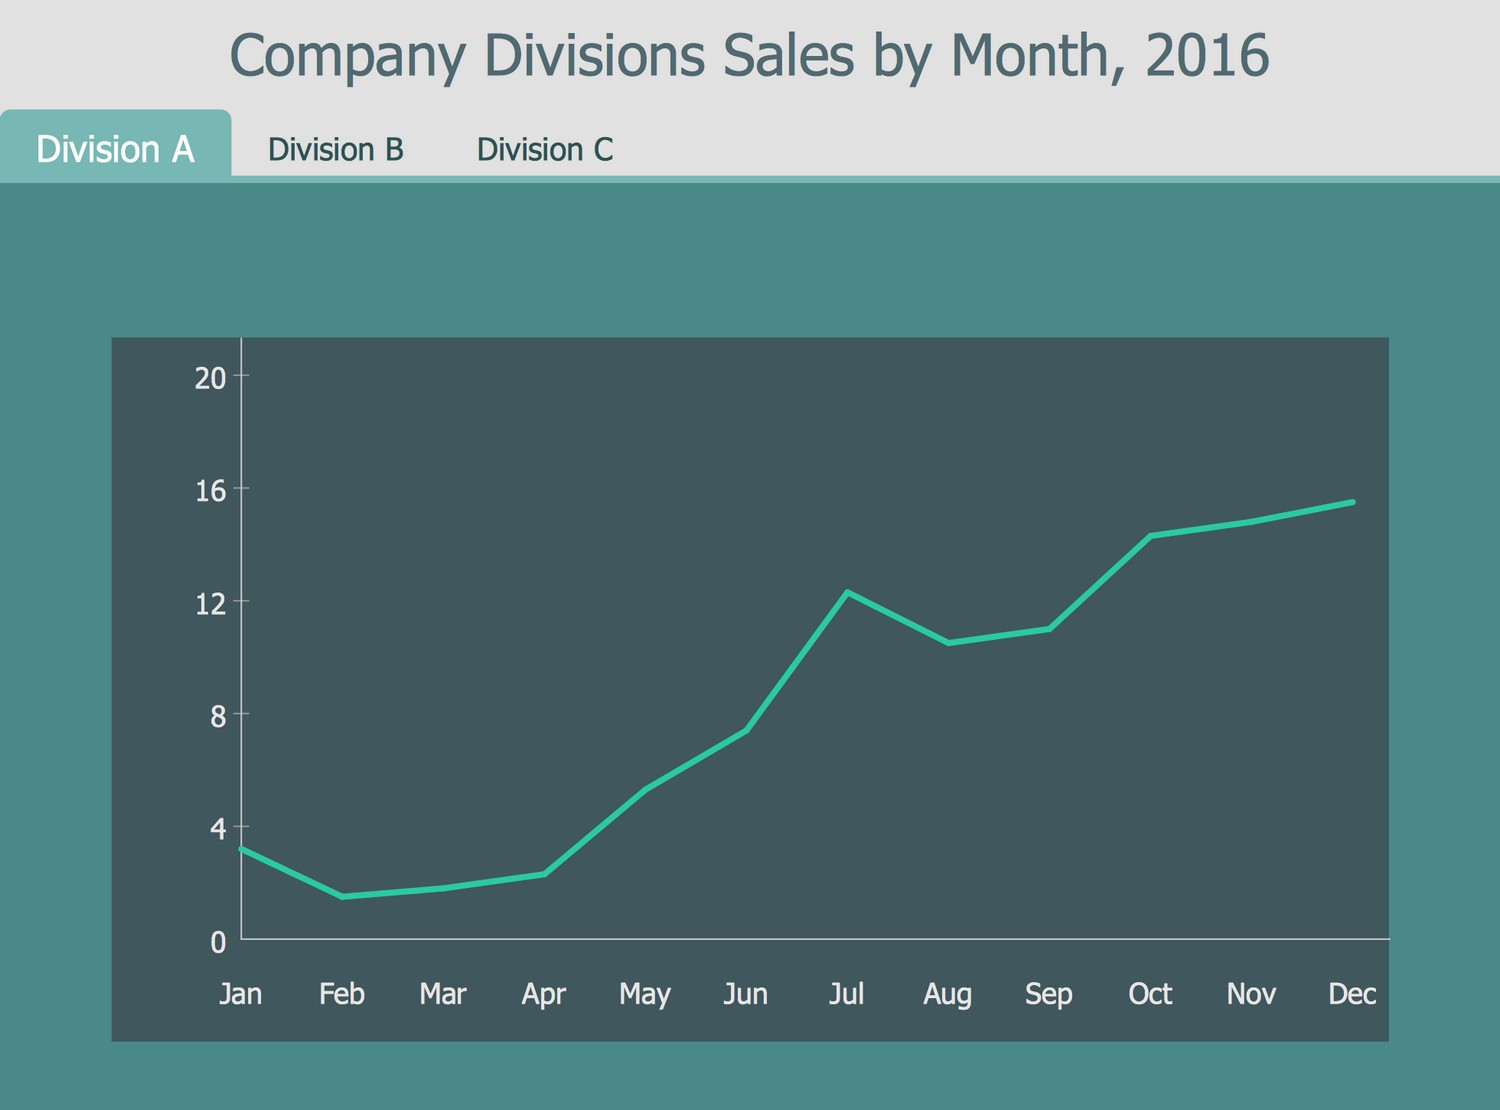 Business Intelligence Dashboard - Company Divisions Sales by Month, 2016